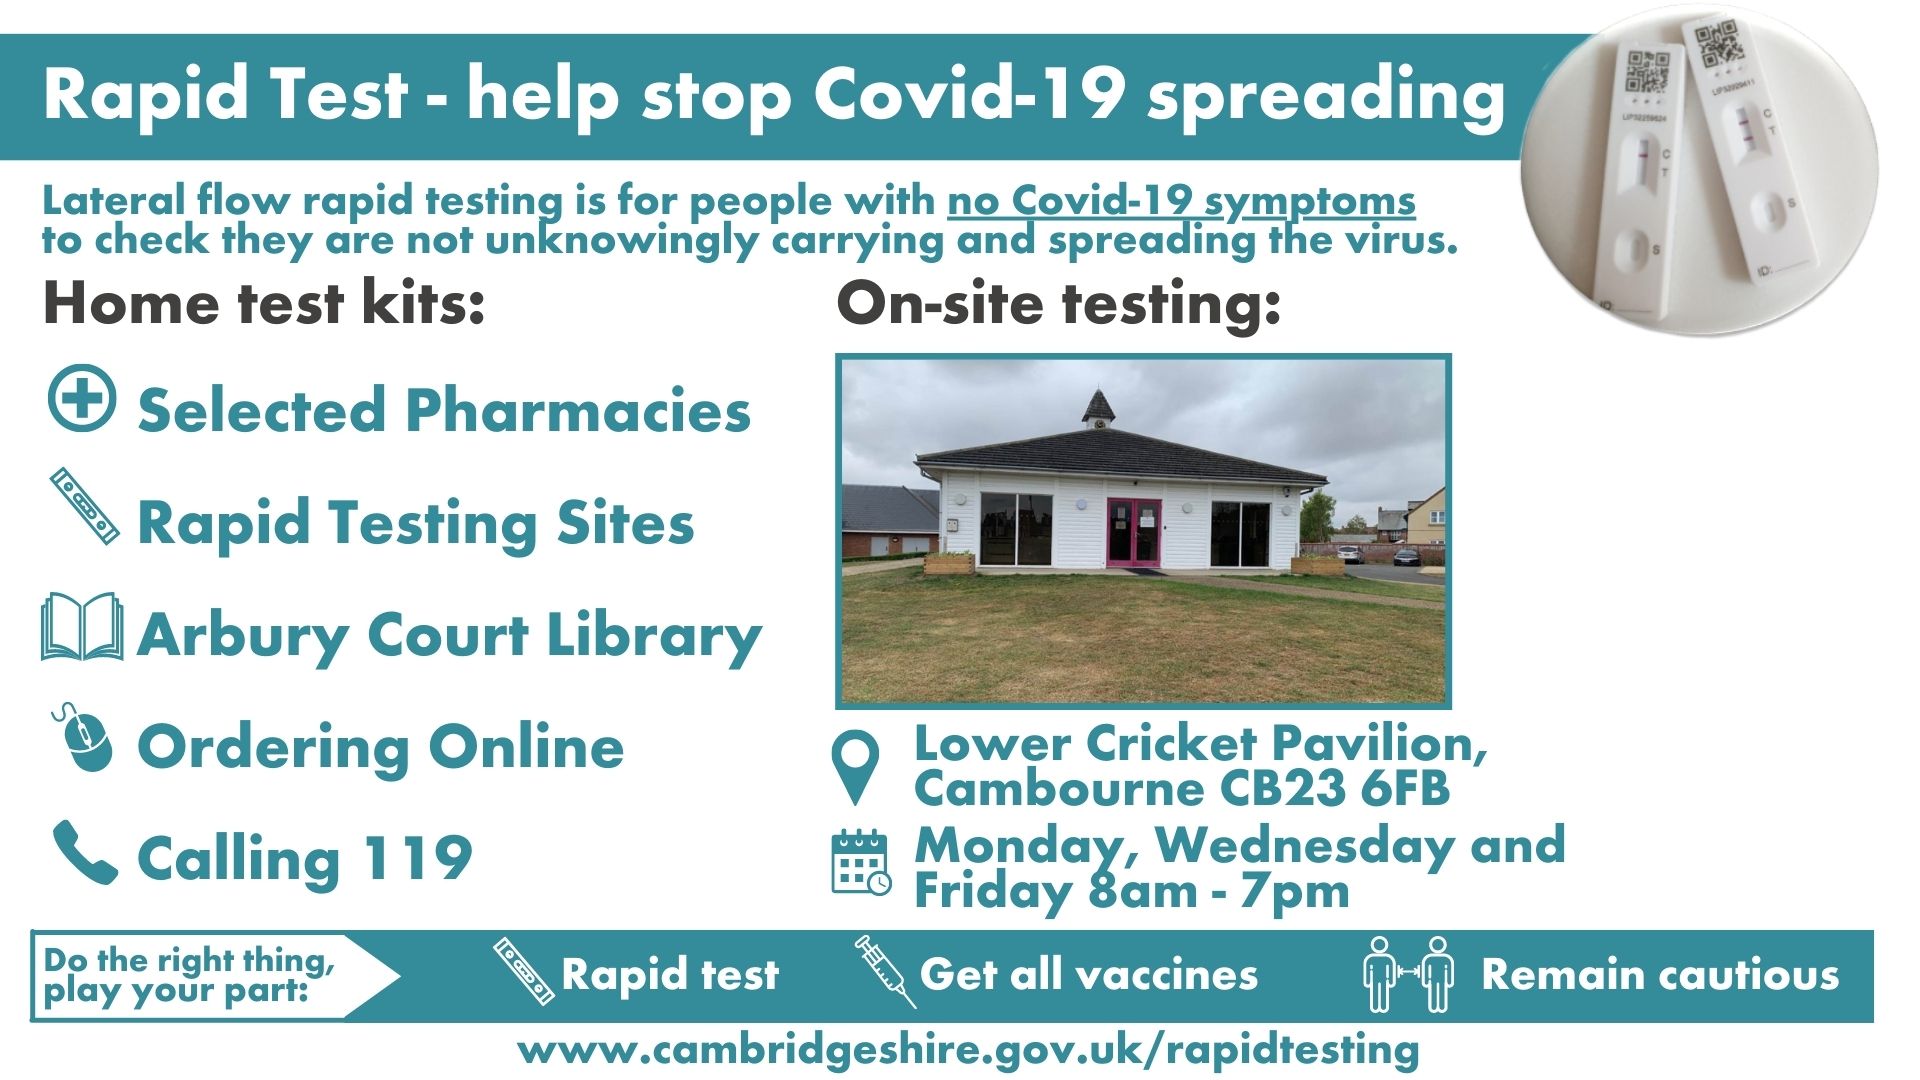 Poster with information on COVID-19 rapid testing